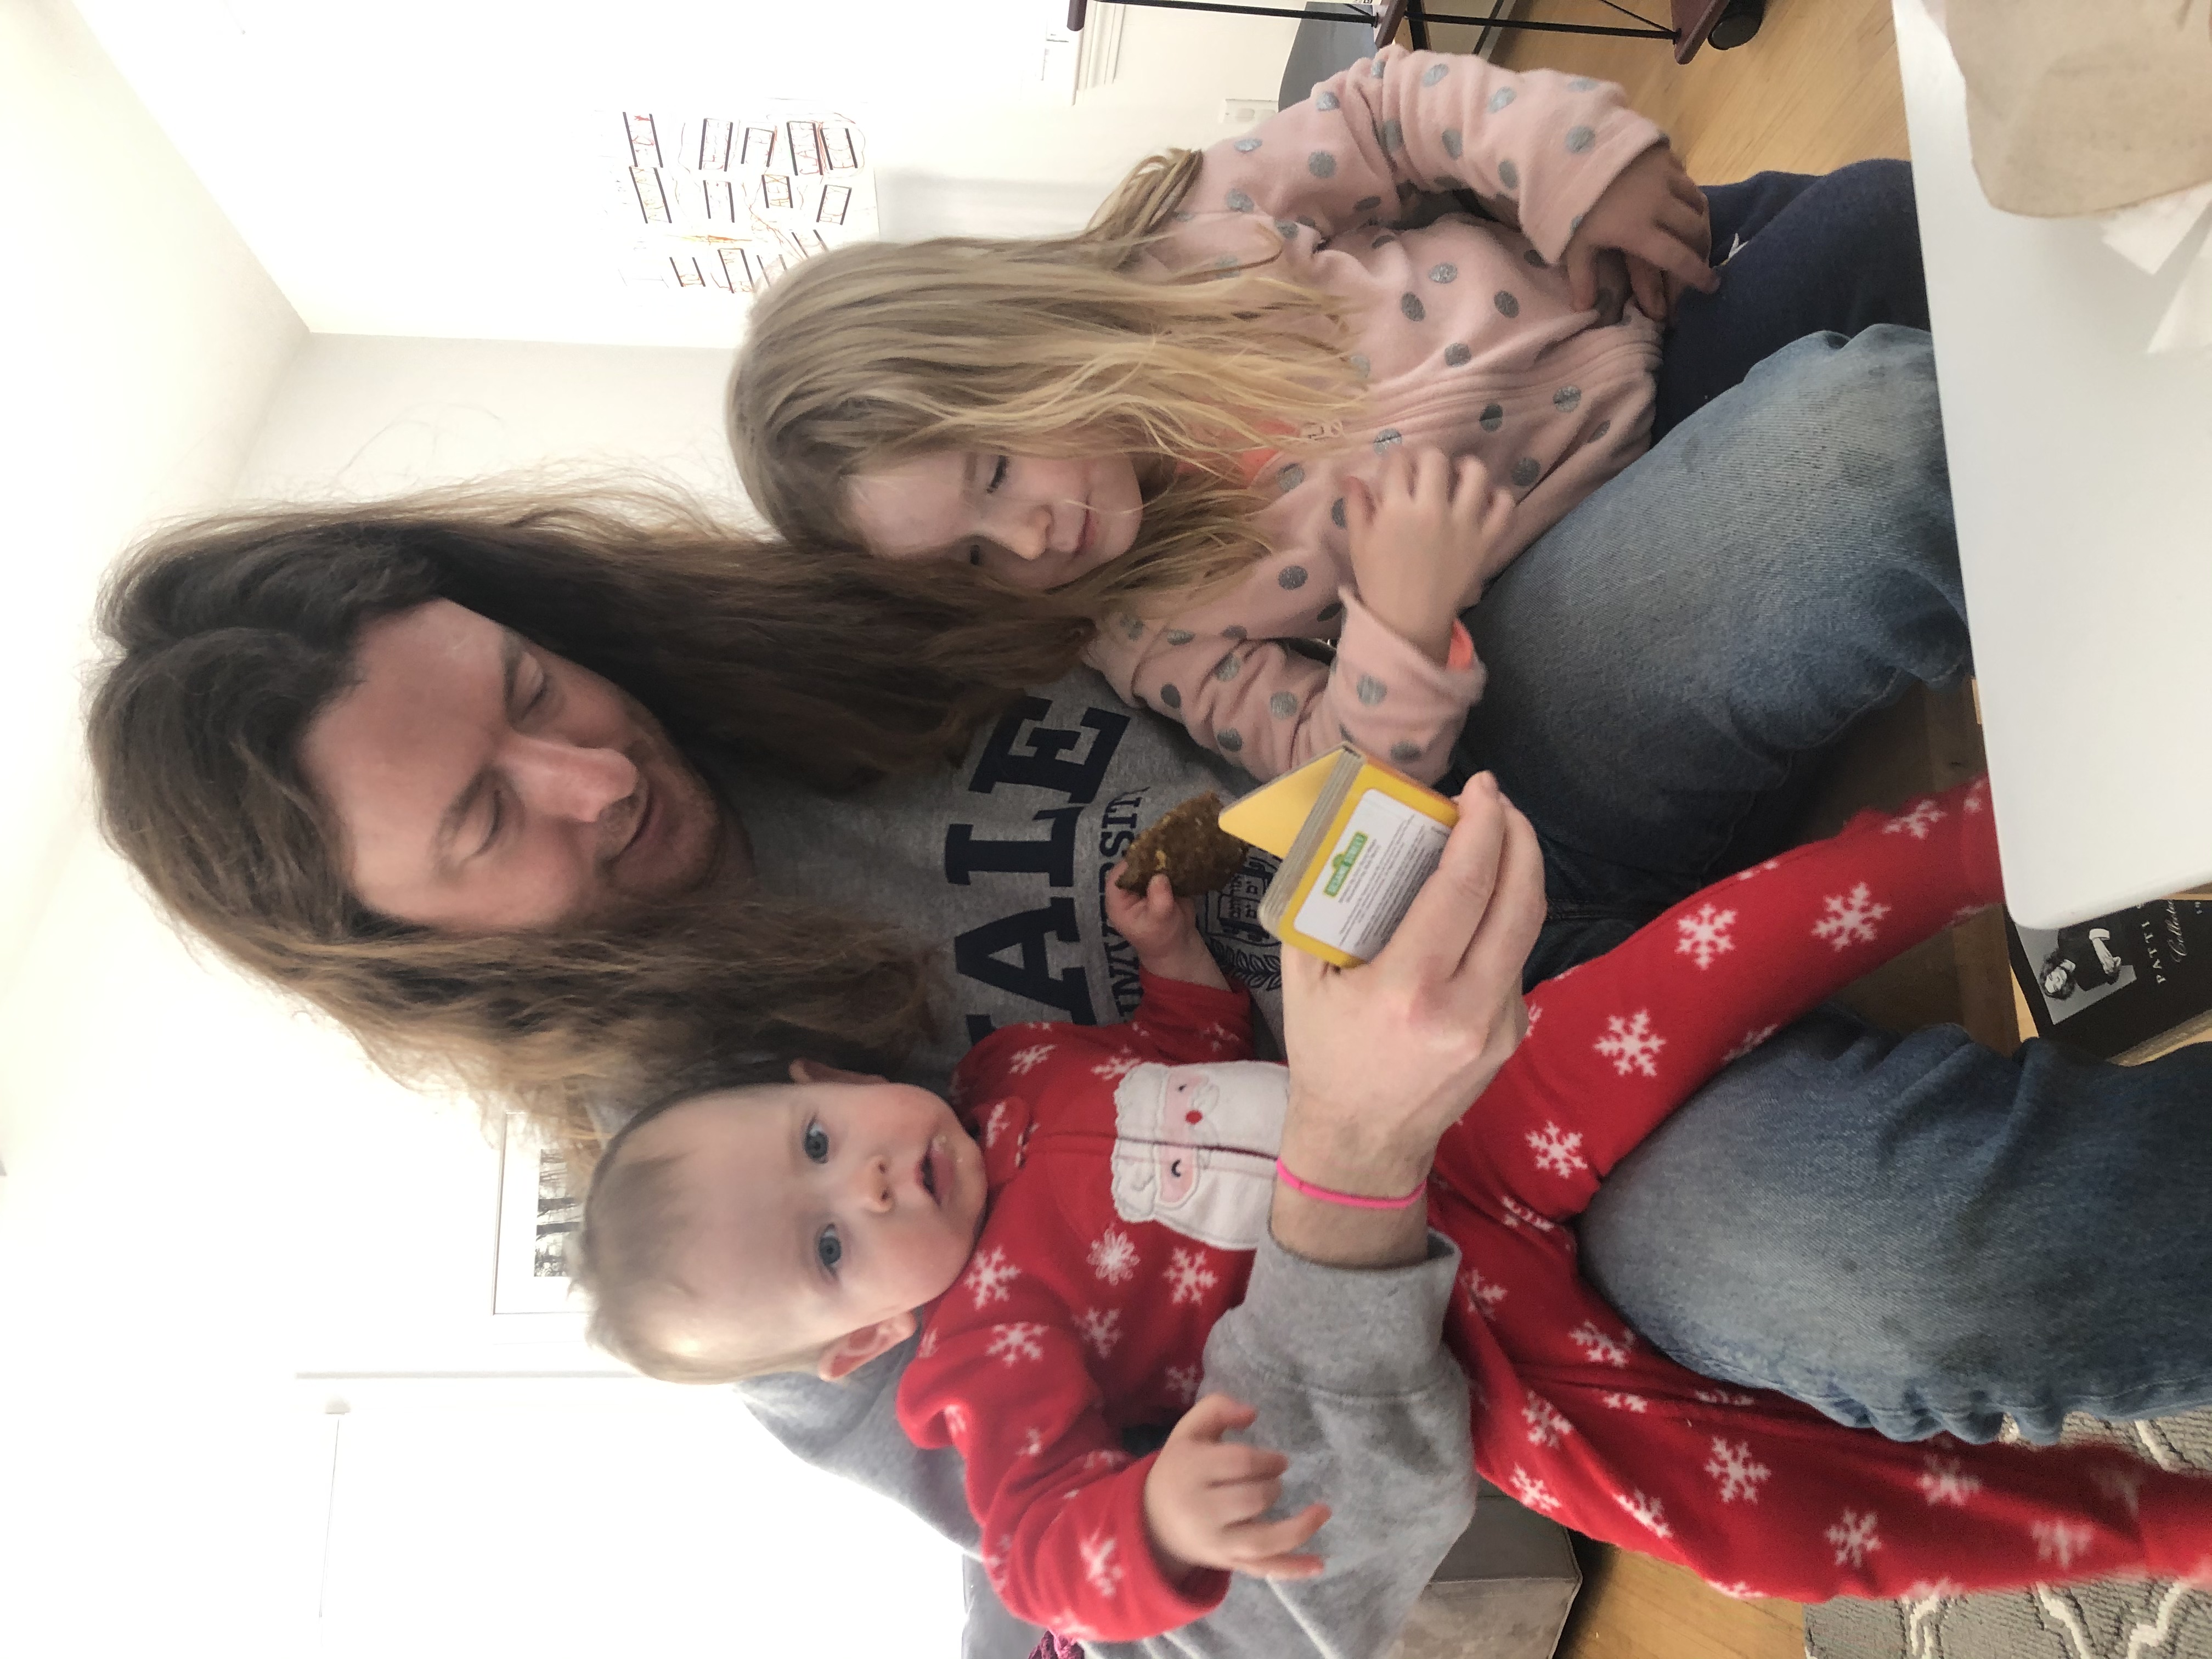 A longhaired dude reading to a 1-year-old and three-year-old.